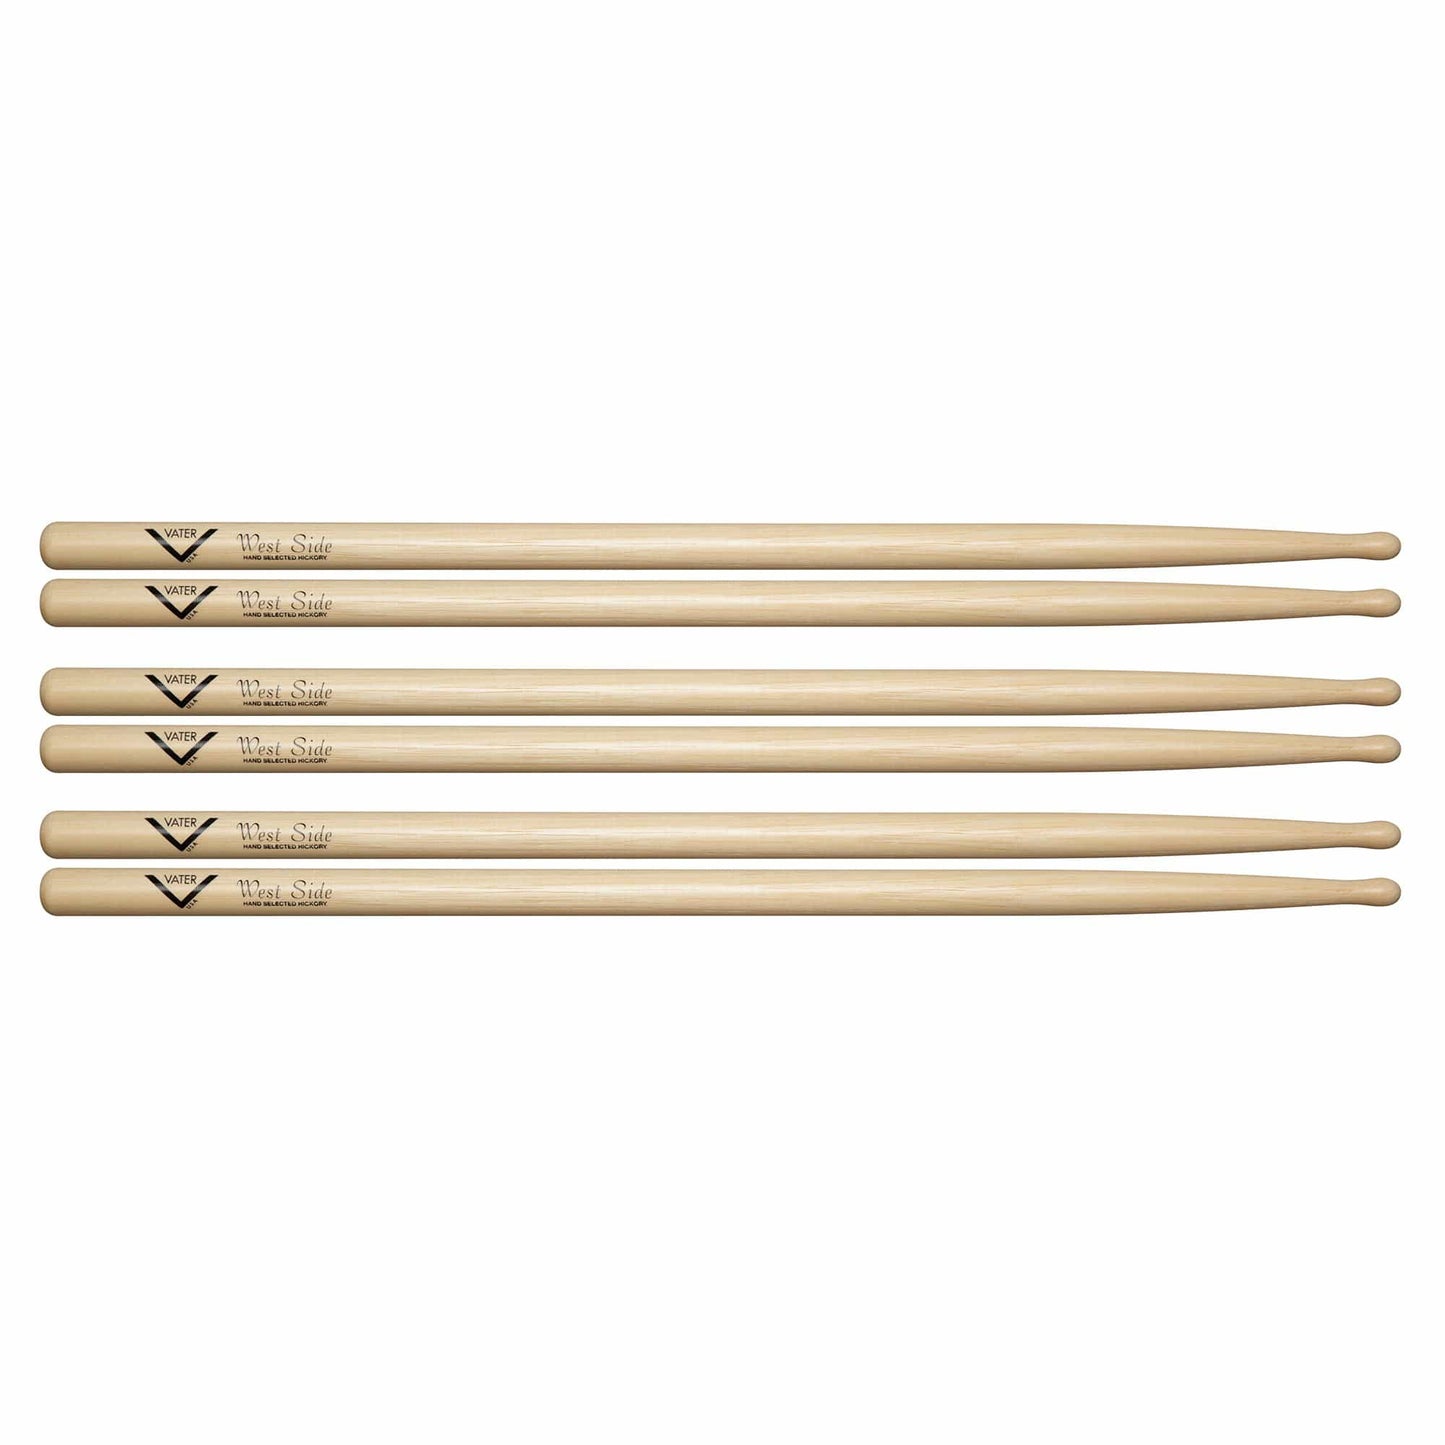 Vater Hickory West Side Wood Tip Drum Sticks (3 Pair Bundle) Drums and Percussion